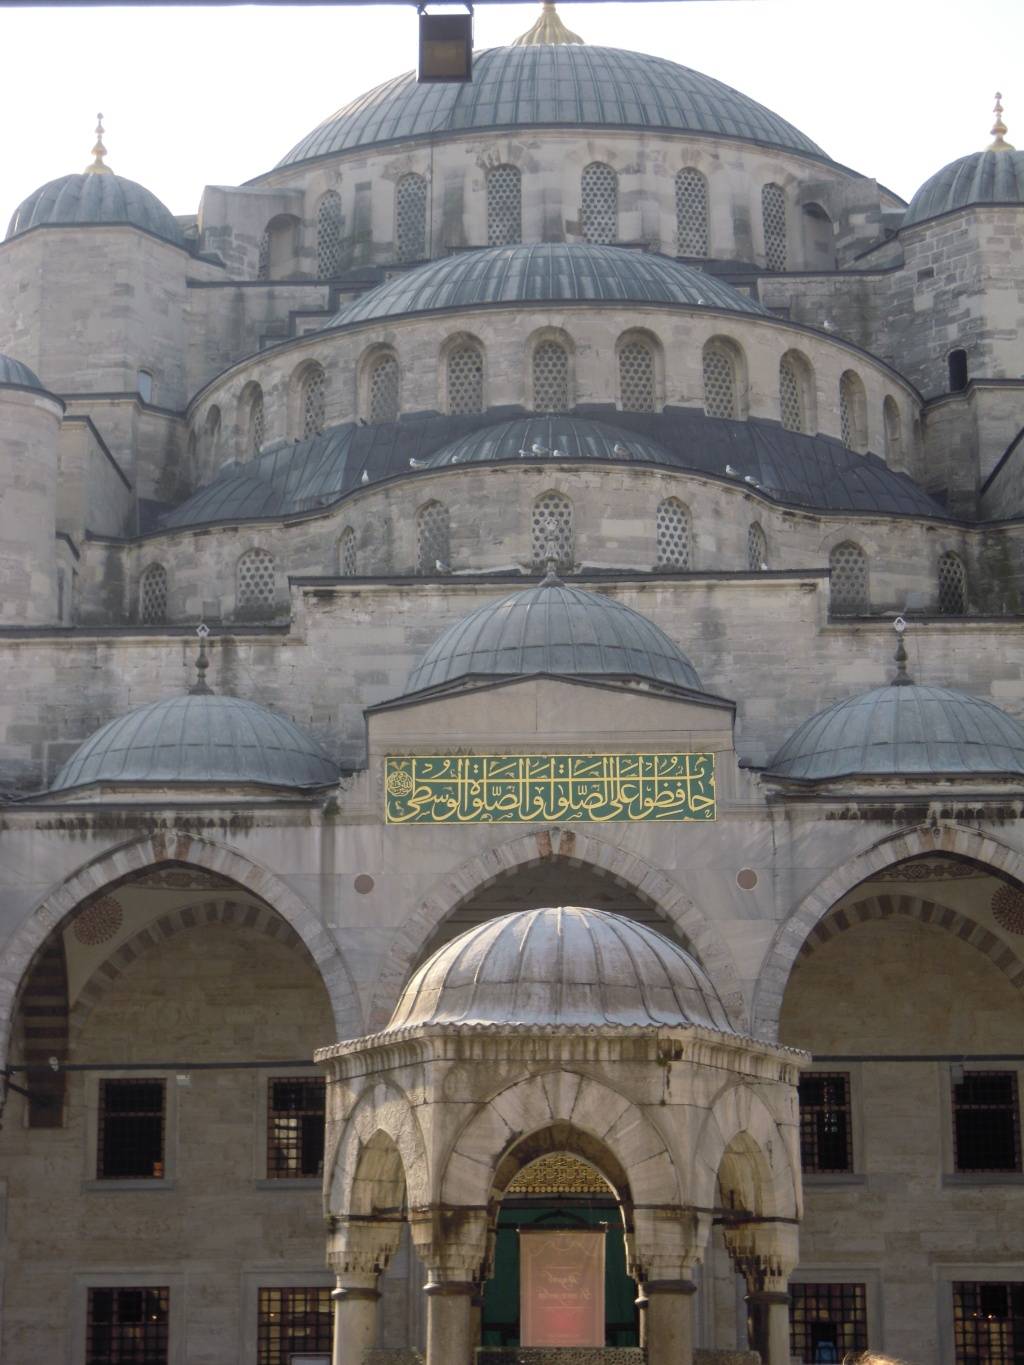 Blue mosque: 145 KB; click on the image to enlarge